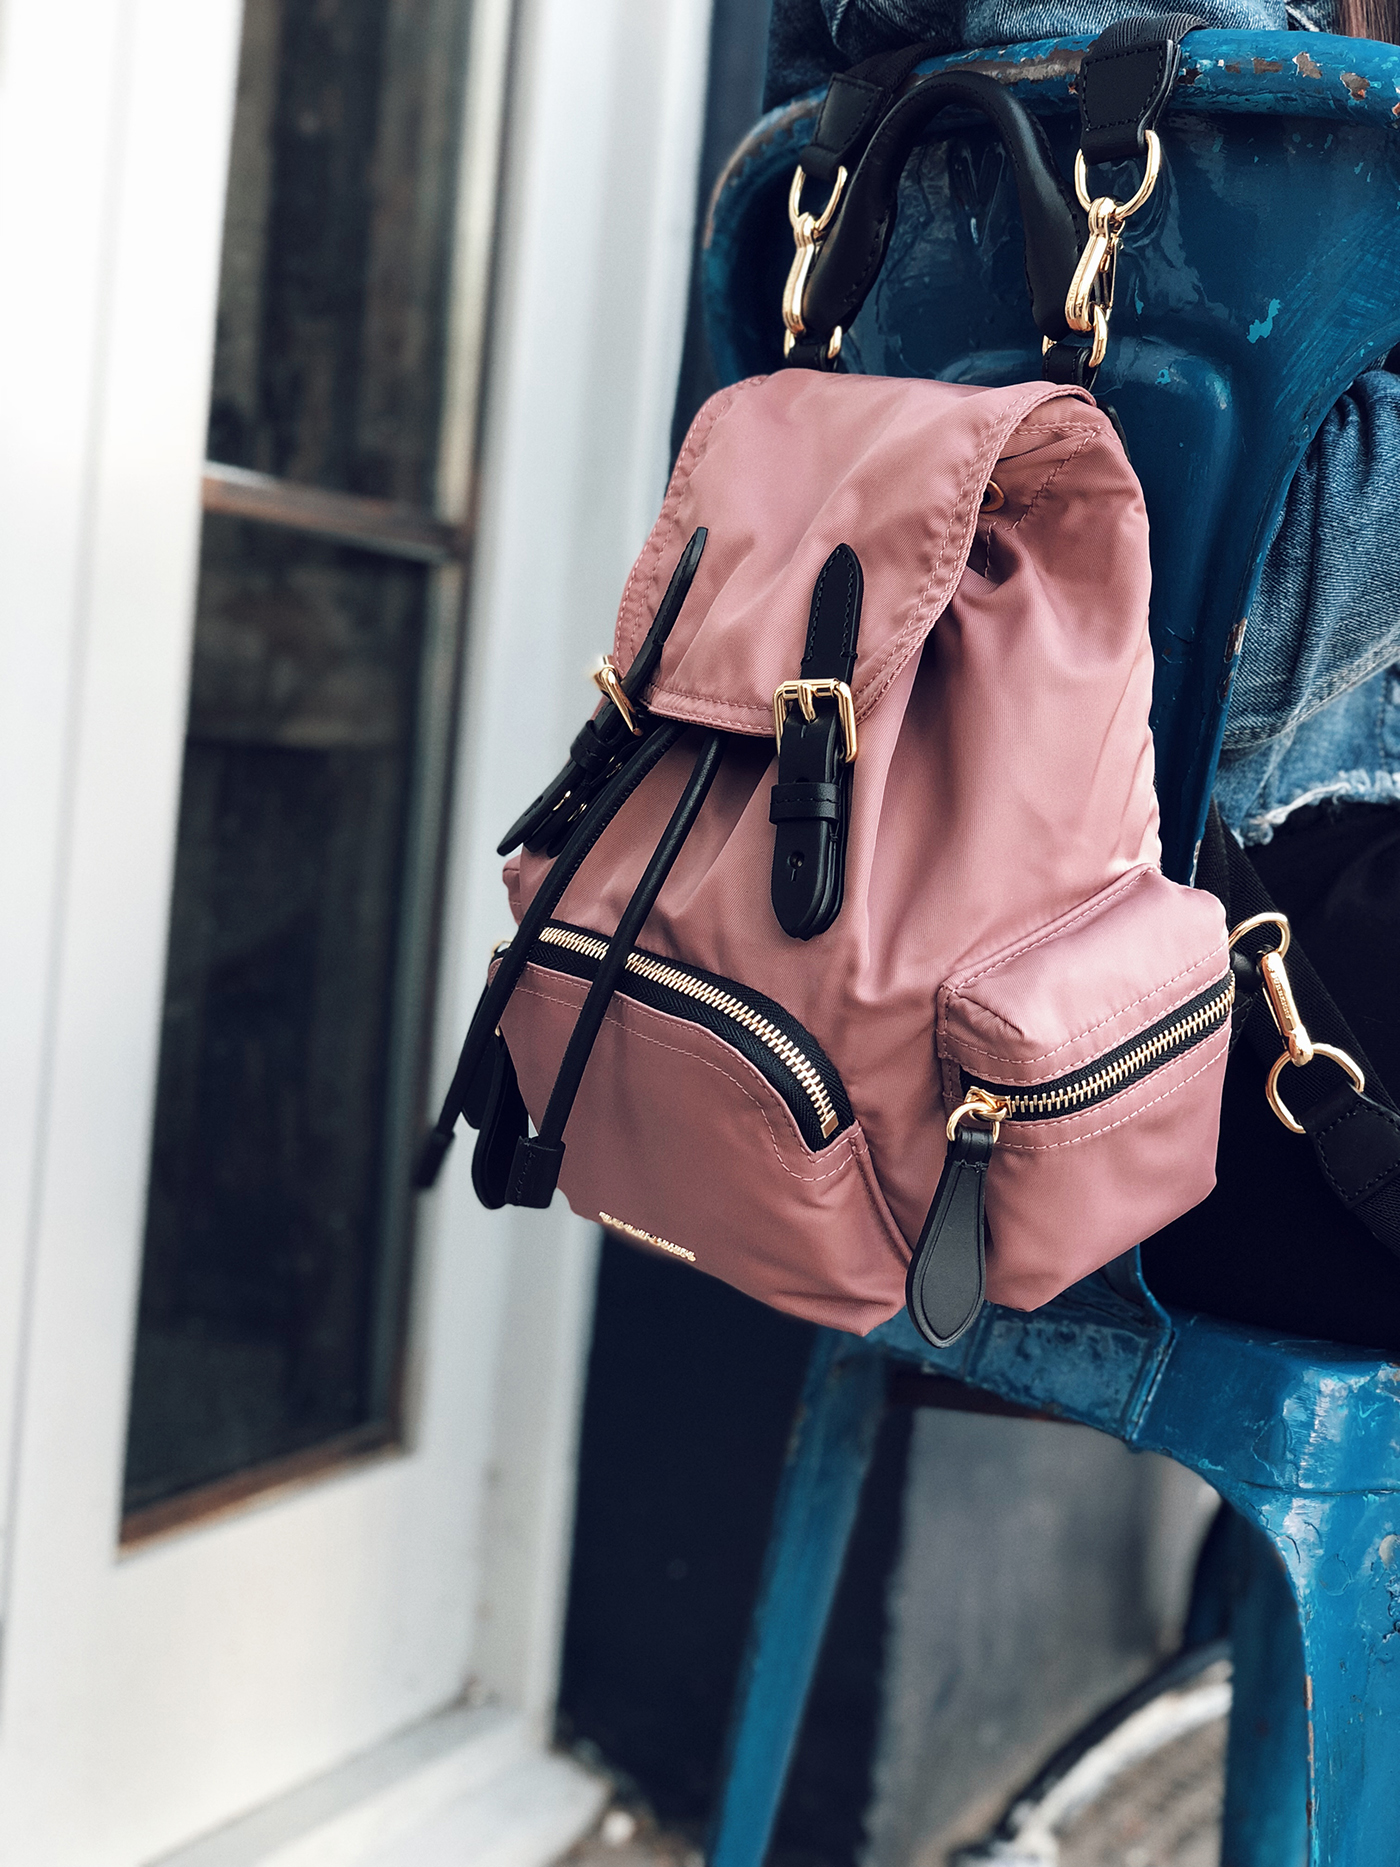 burberry backpack mauve pink